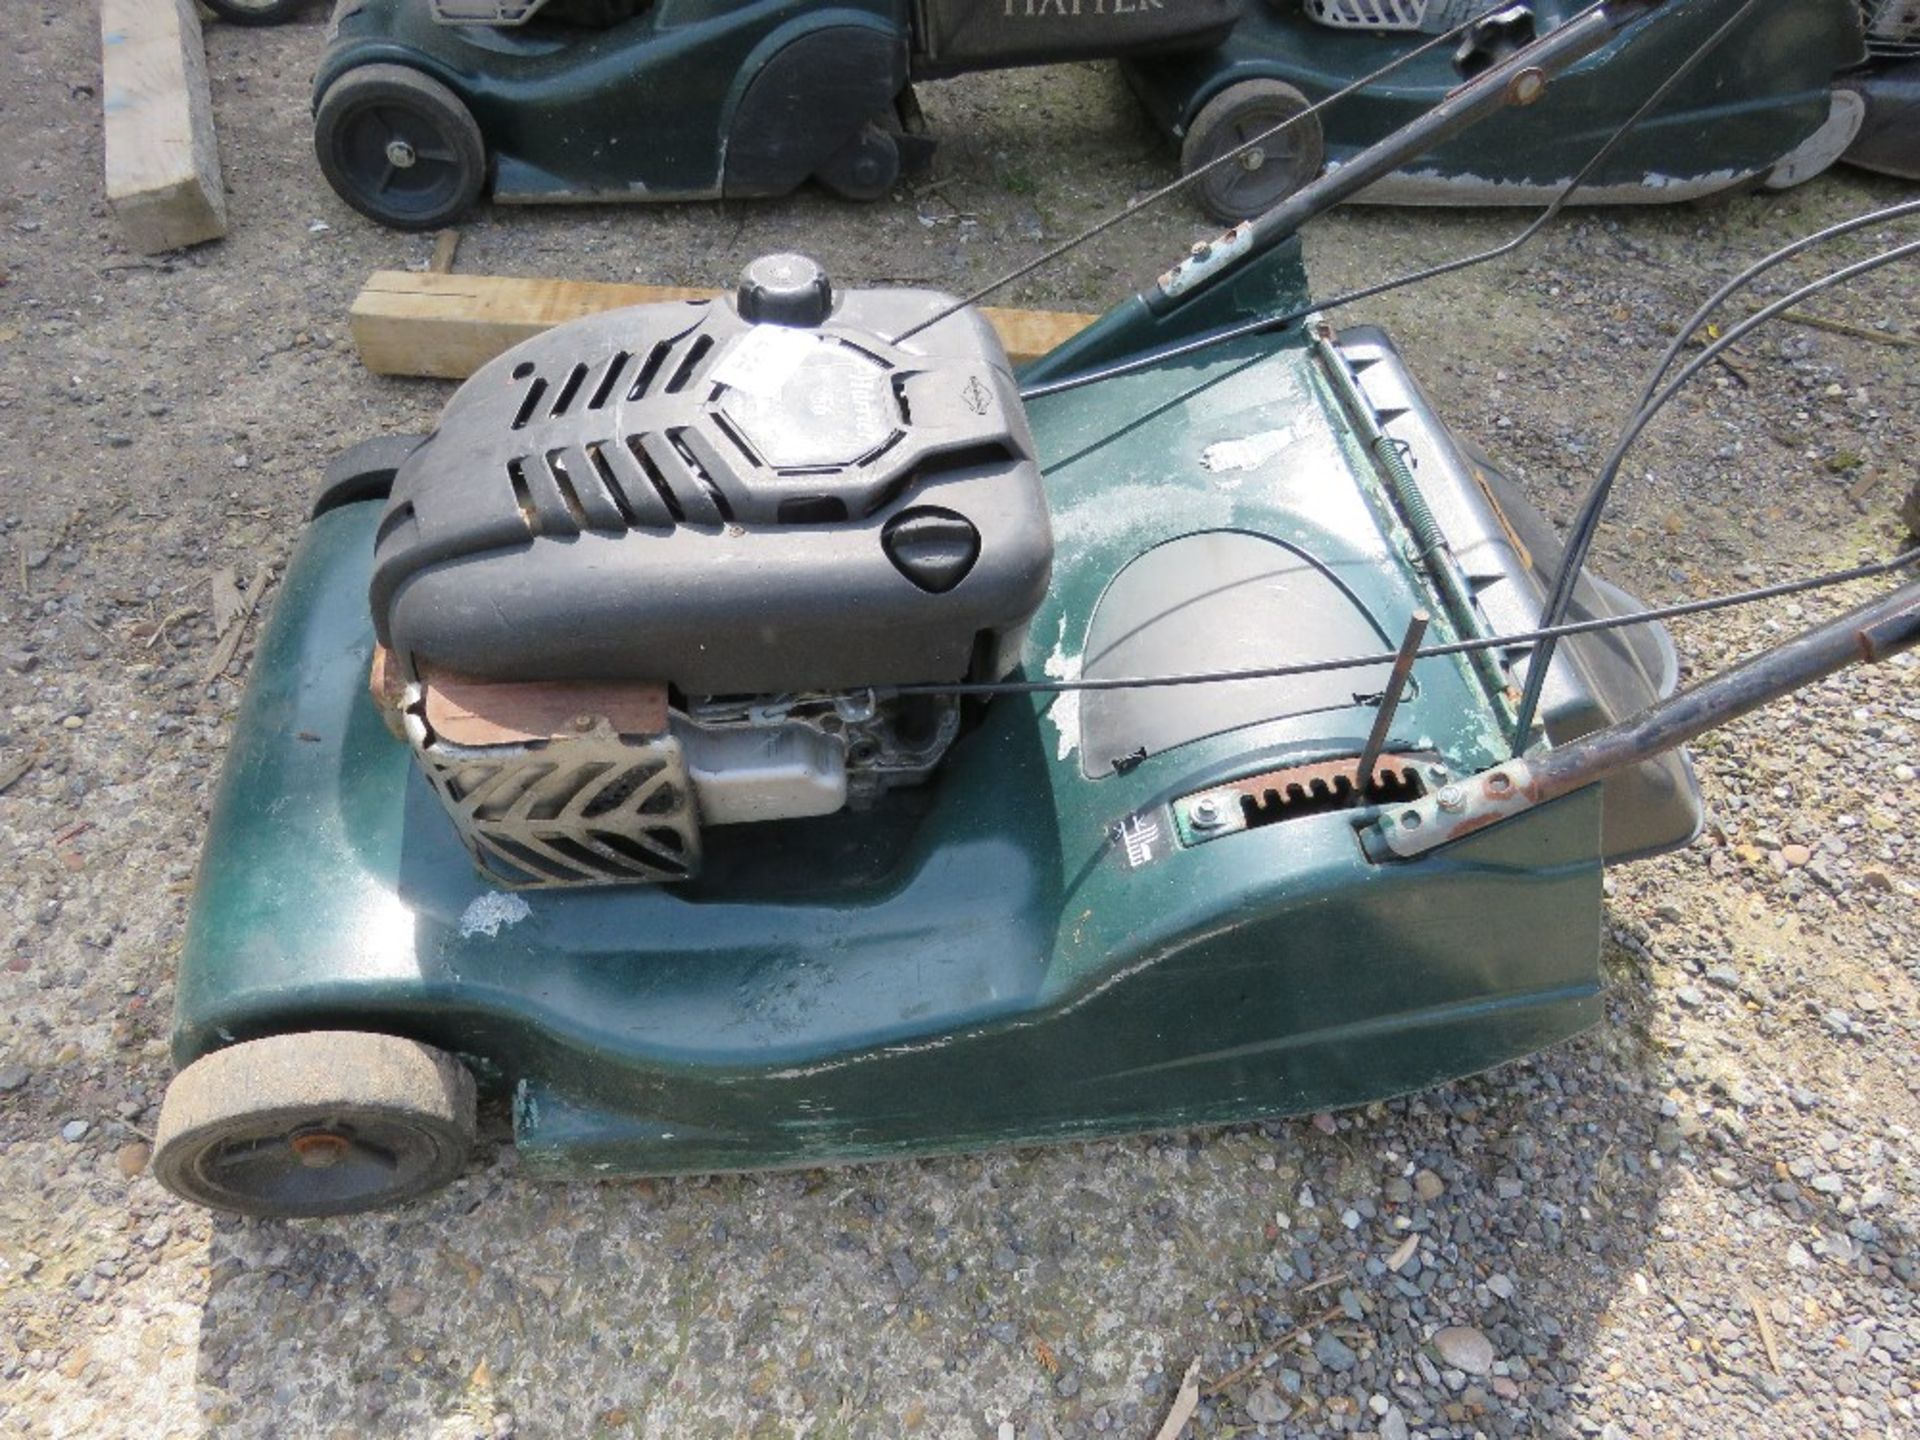 HAYTER HARRIER 56 PETROL ENGINED MOWER WITH REAR ROLLER AND NO COLLECTOR. ....THIS LOT IS SOLD UNDER - Image 2 of 4